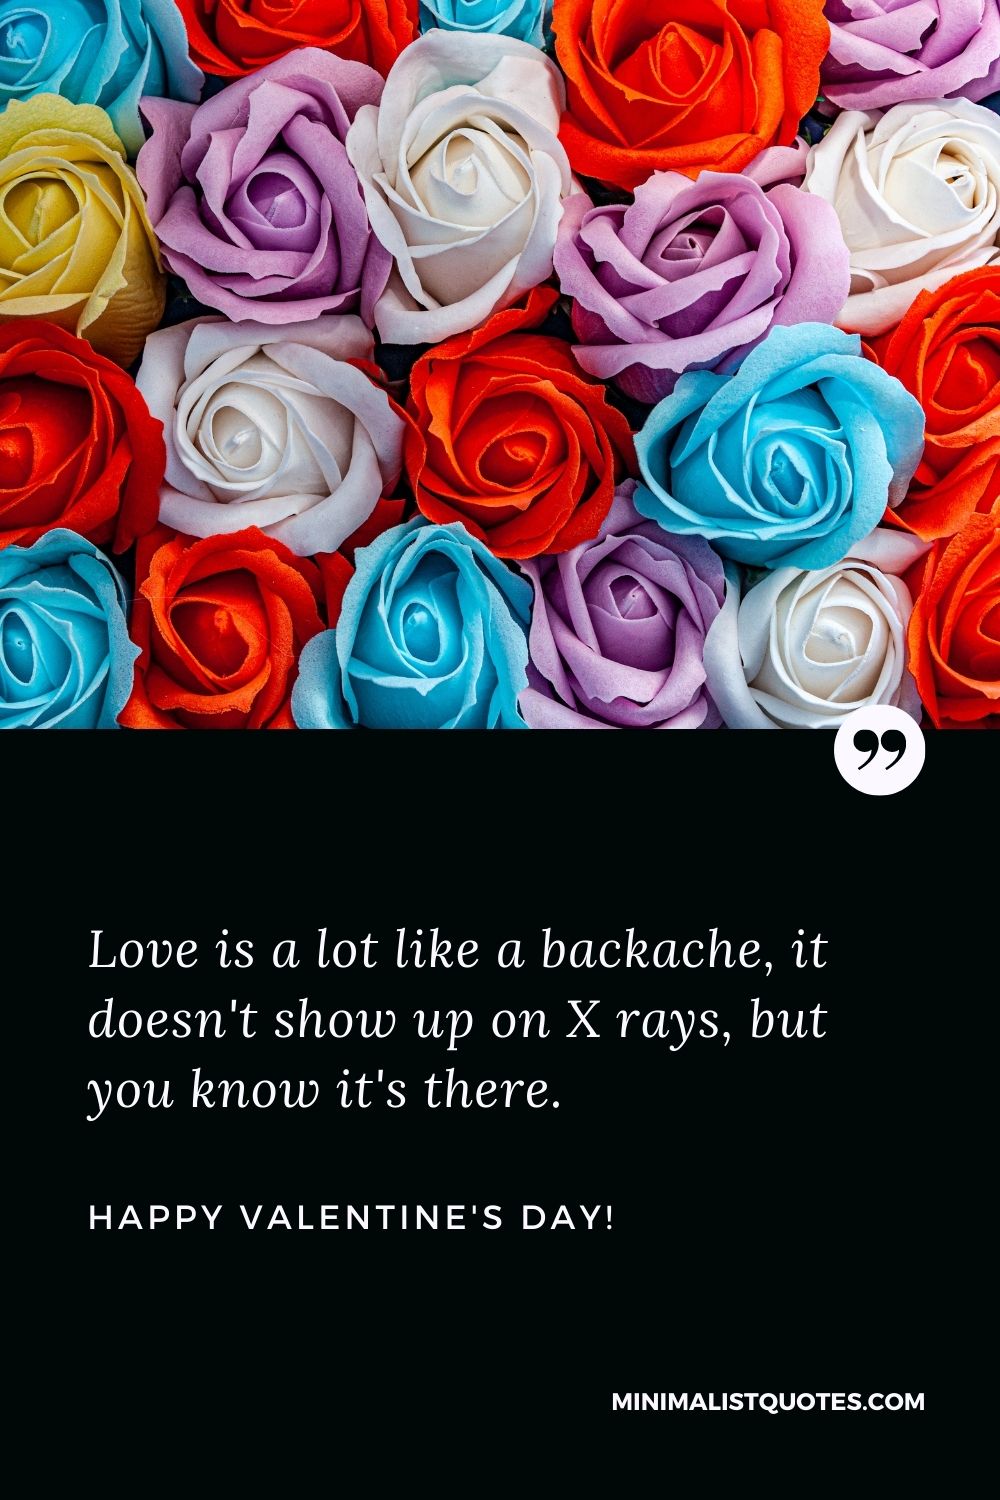 Love is a lot like a backache, it doesn't show up on X rays, but you know  it's there. Happy Valentines Day!